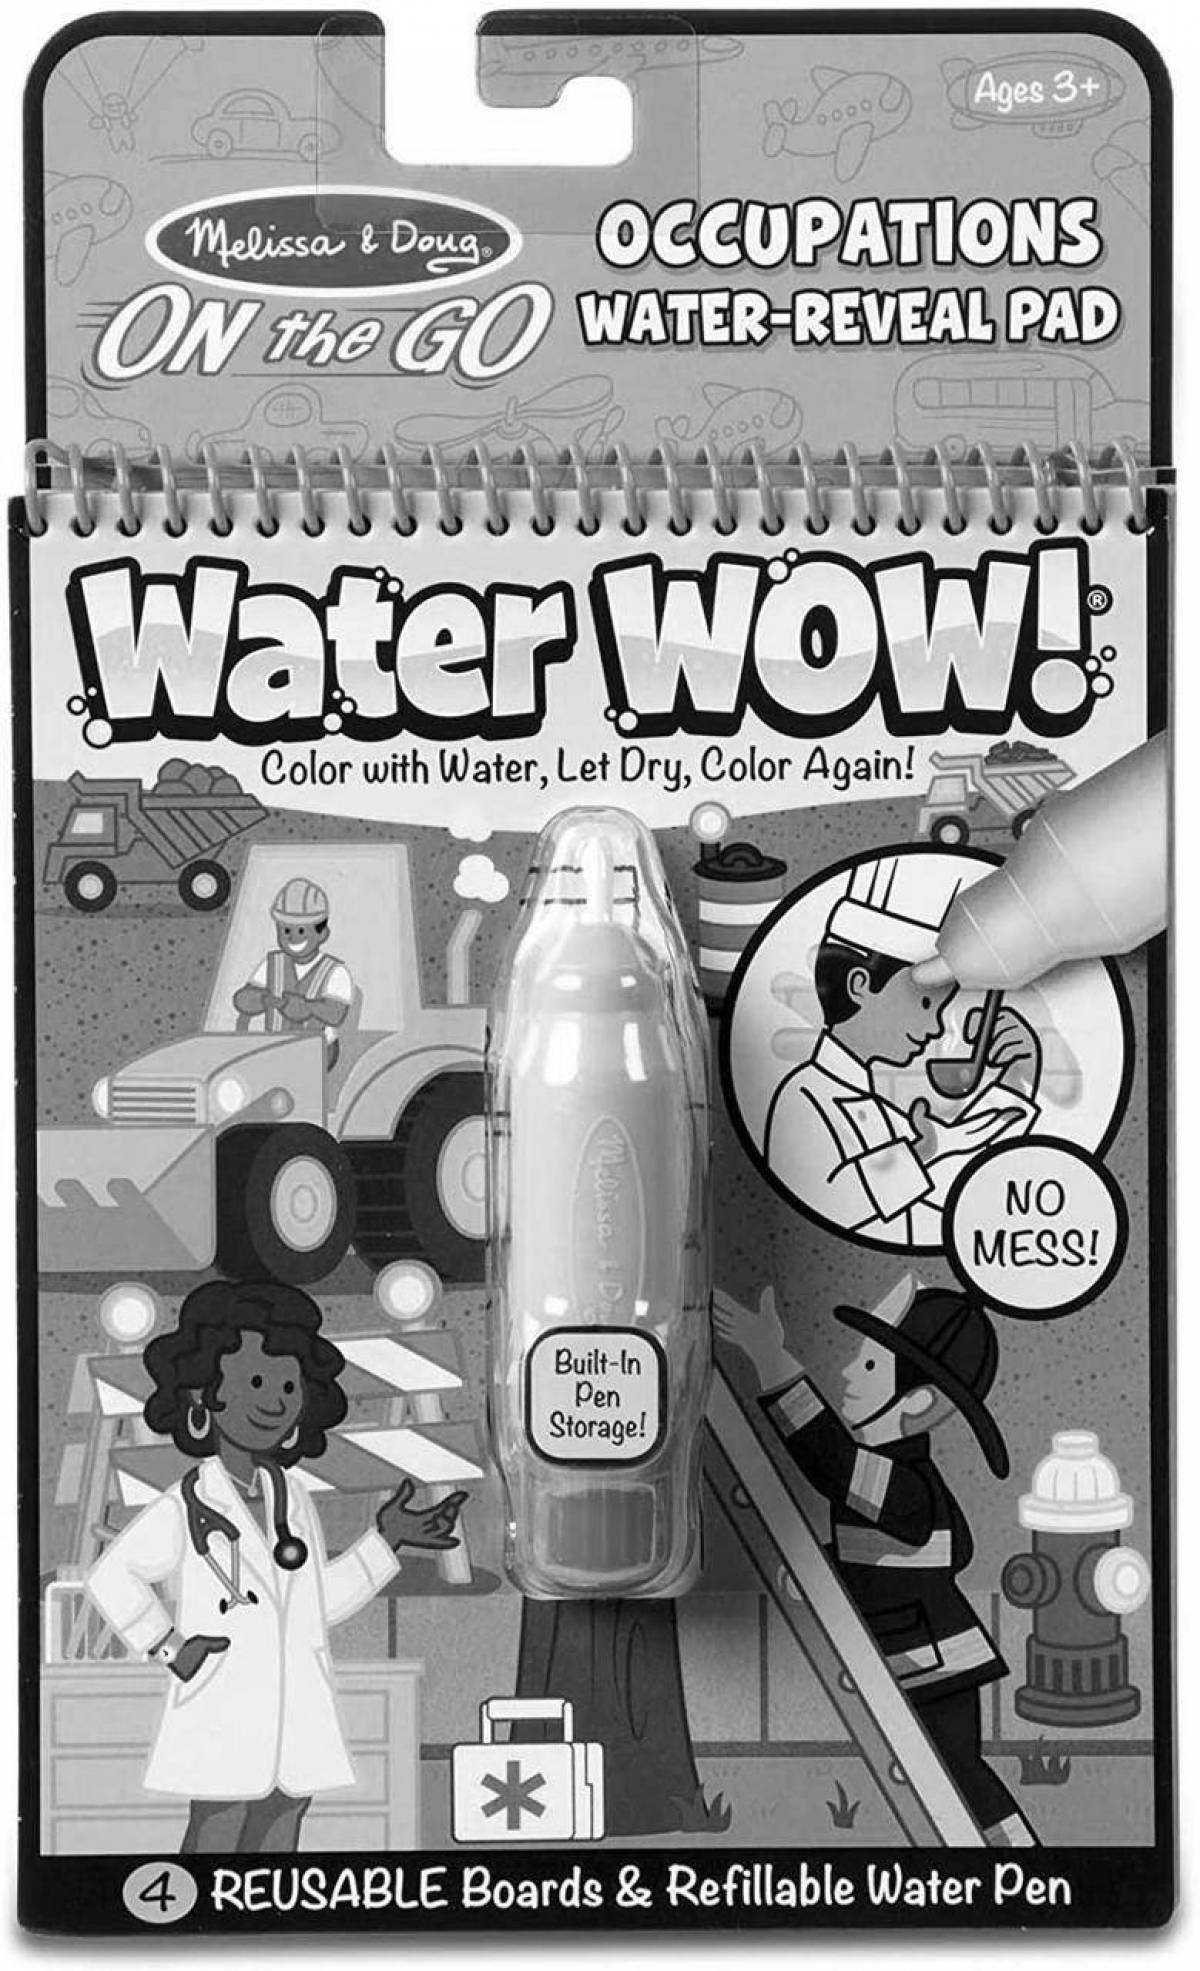 Radiant water wow coloring page